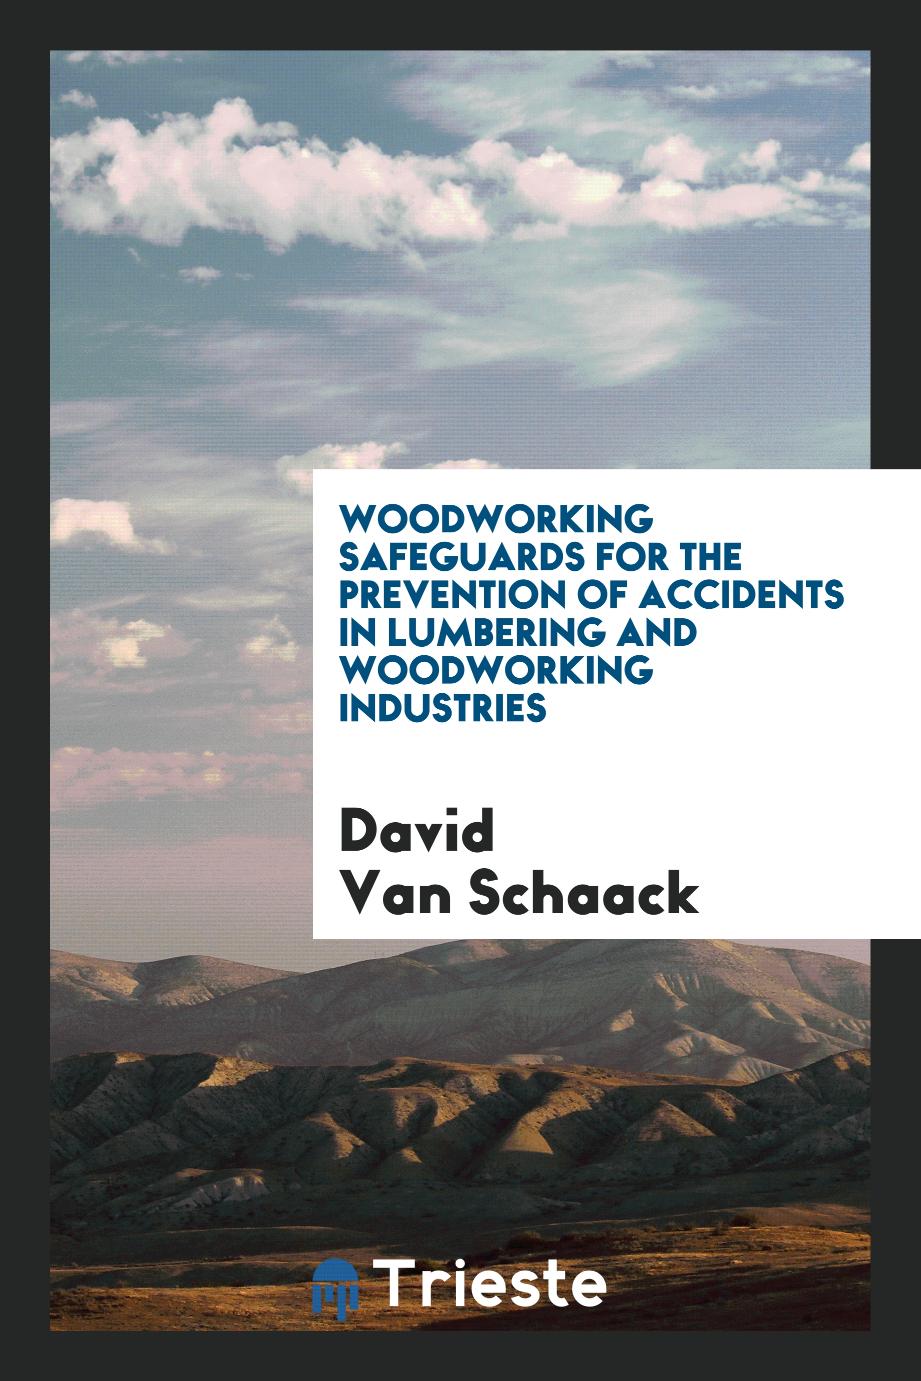 Woodworking Safeguards for the Prevention of Accidents in Lumbering and Woodworking Industries